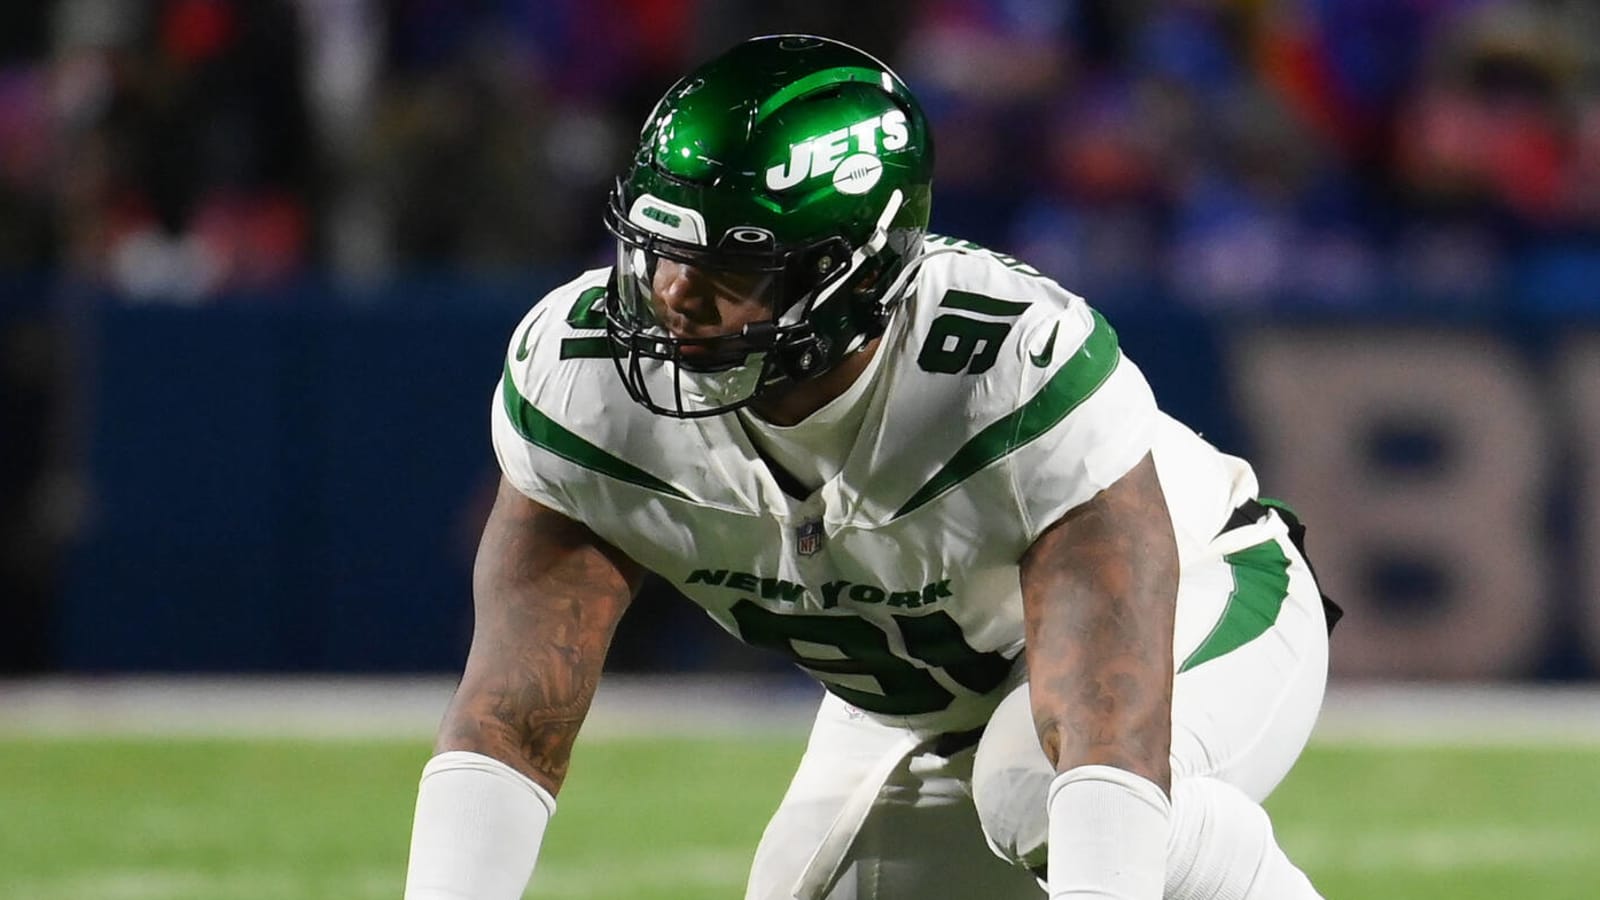 Report: Broncos to acquire defensive lineman from Jets